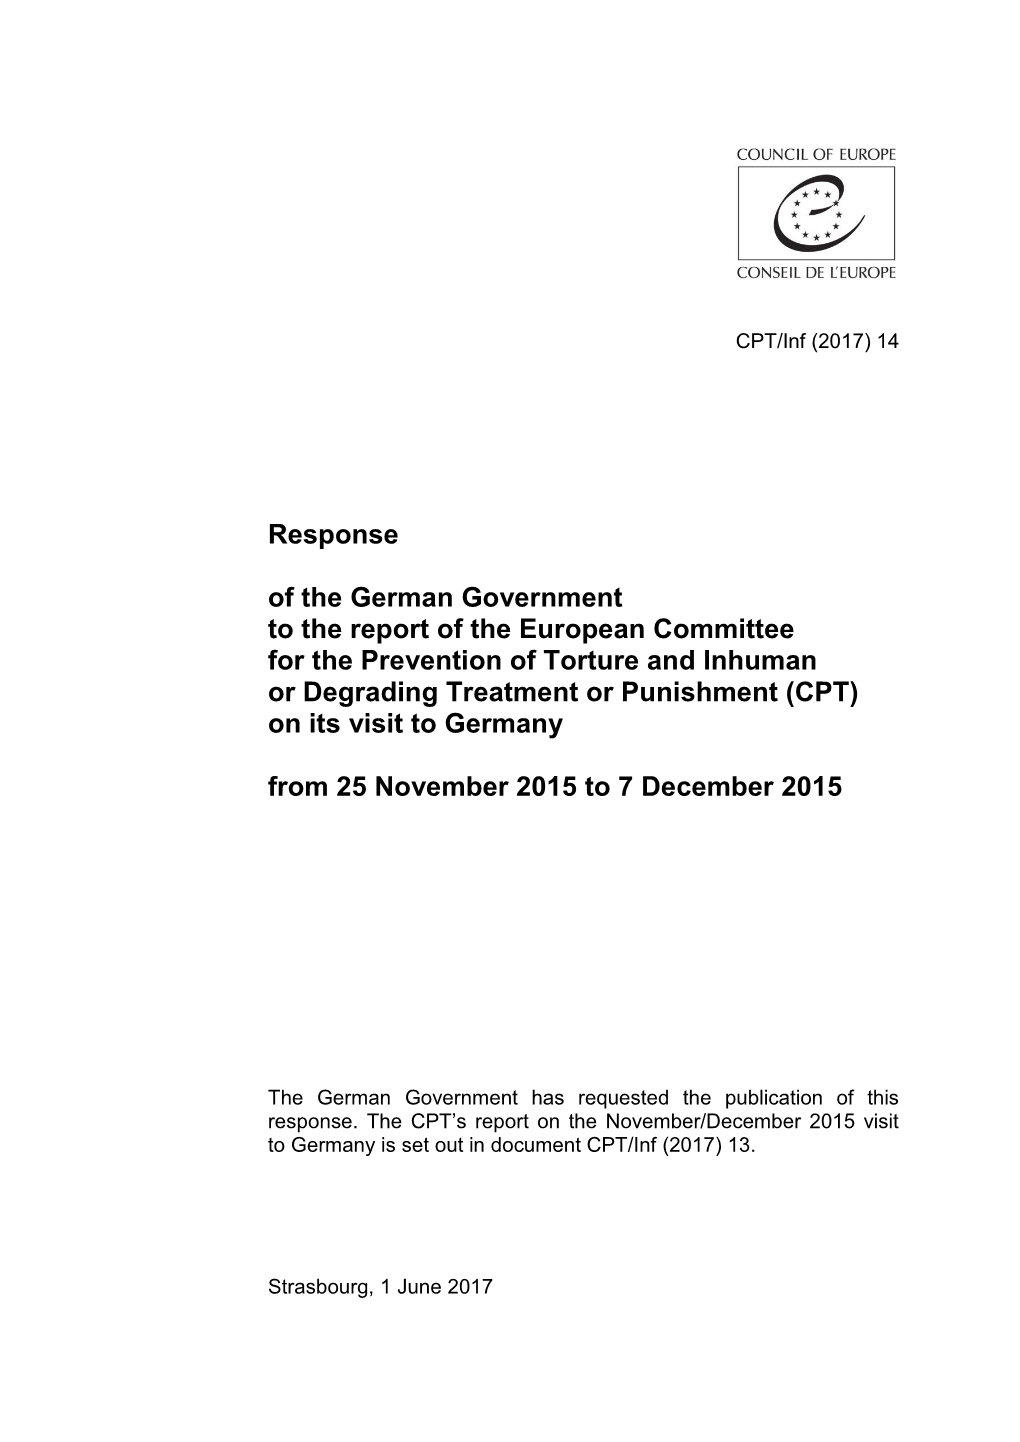 Response of the German Government to the Report of the European